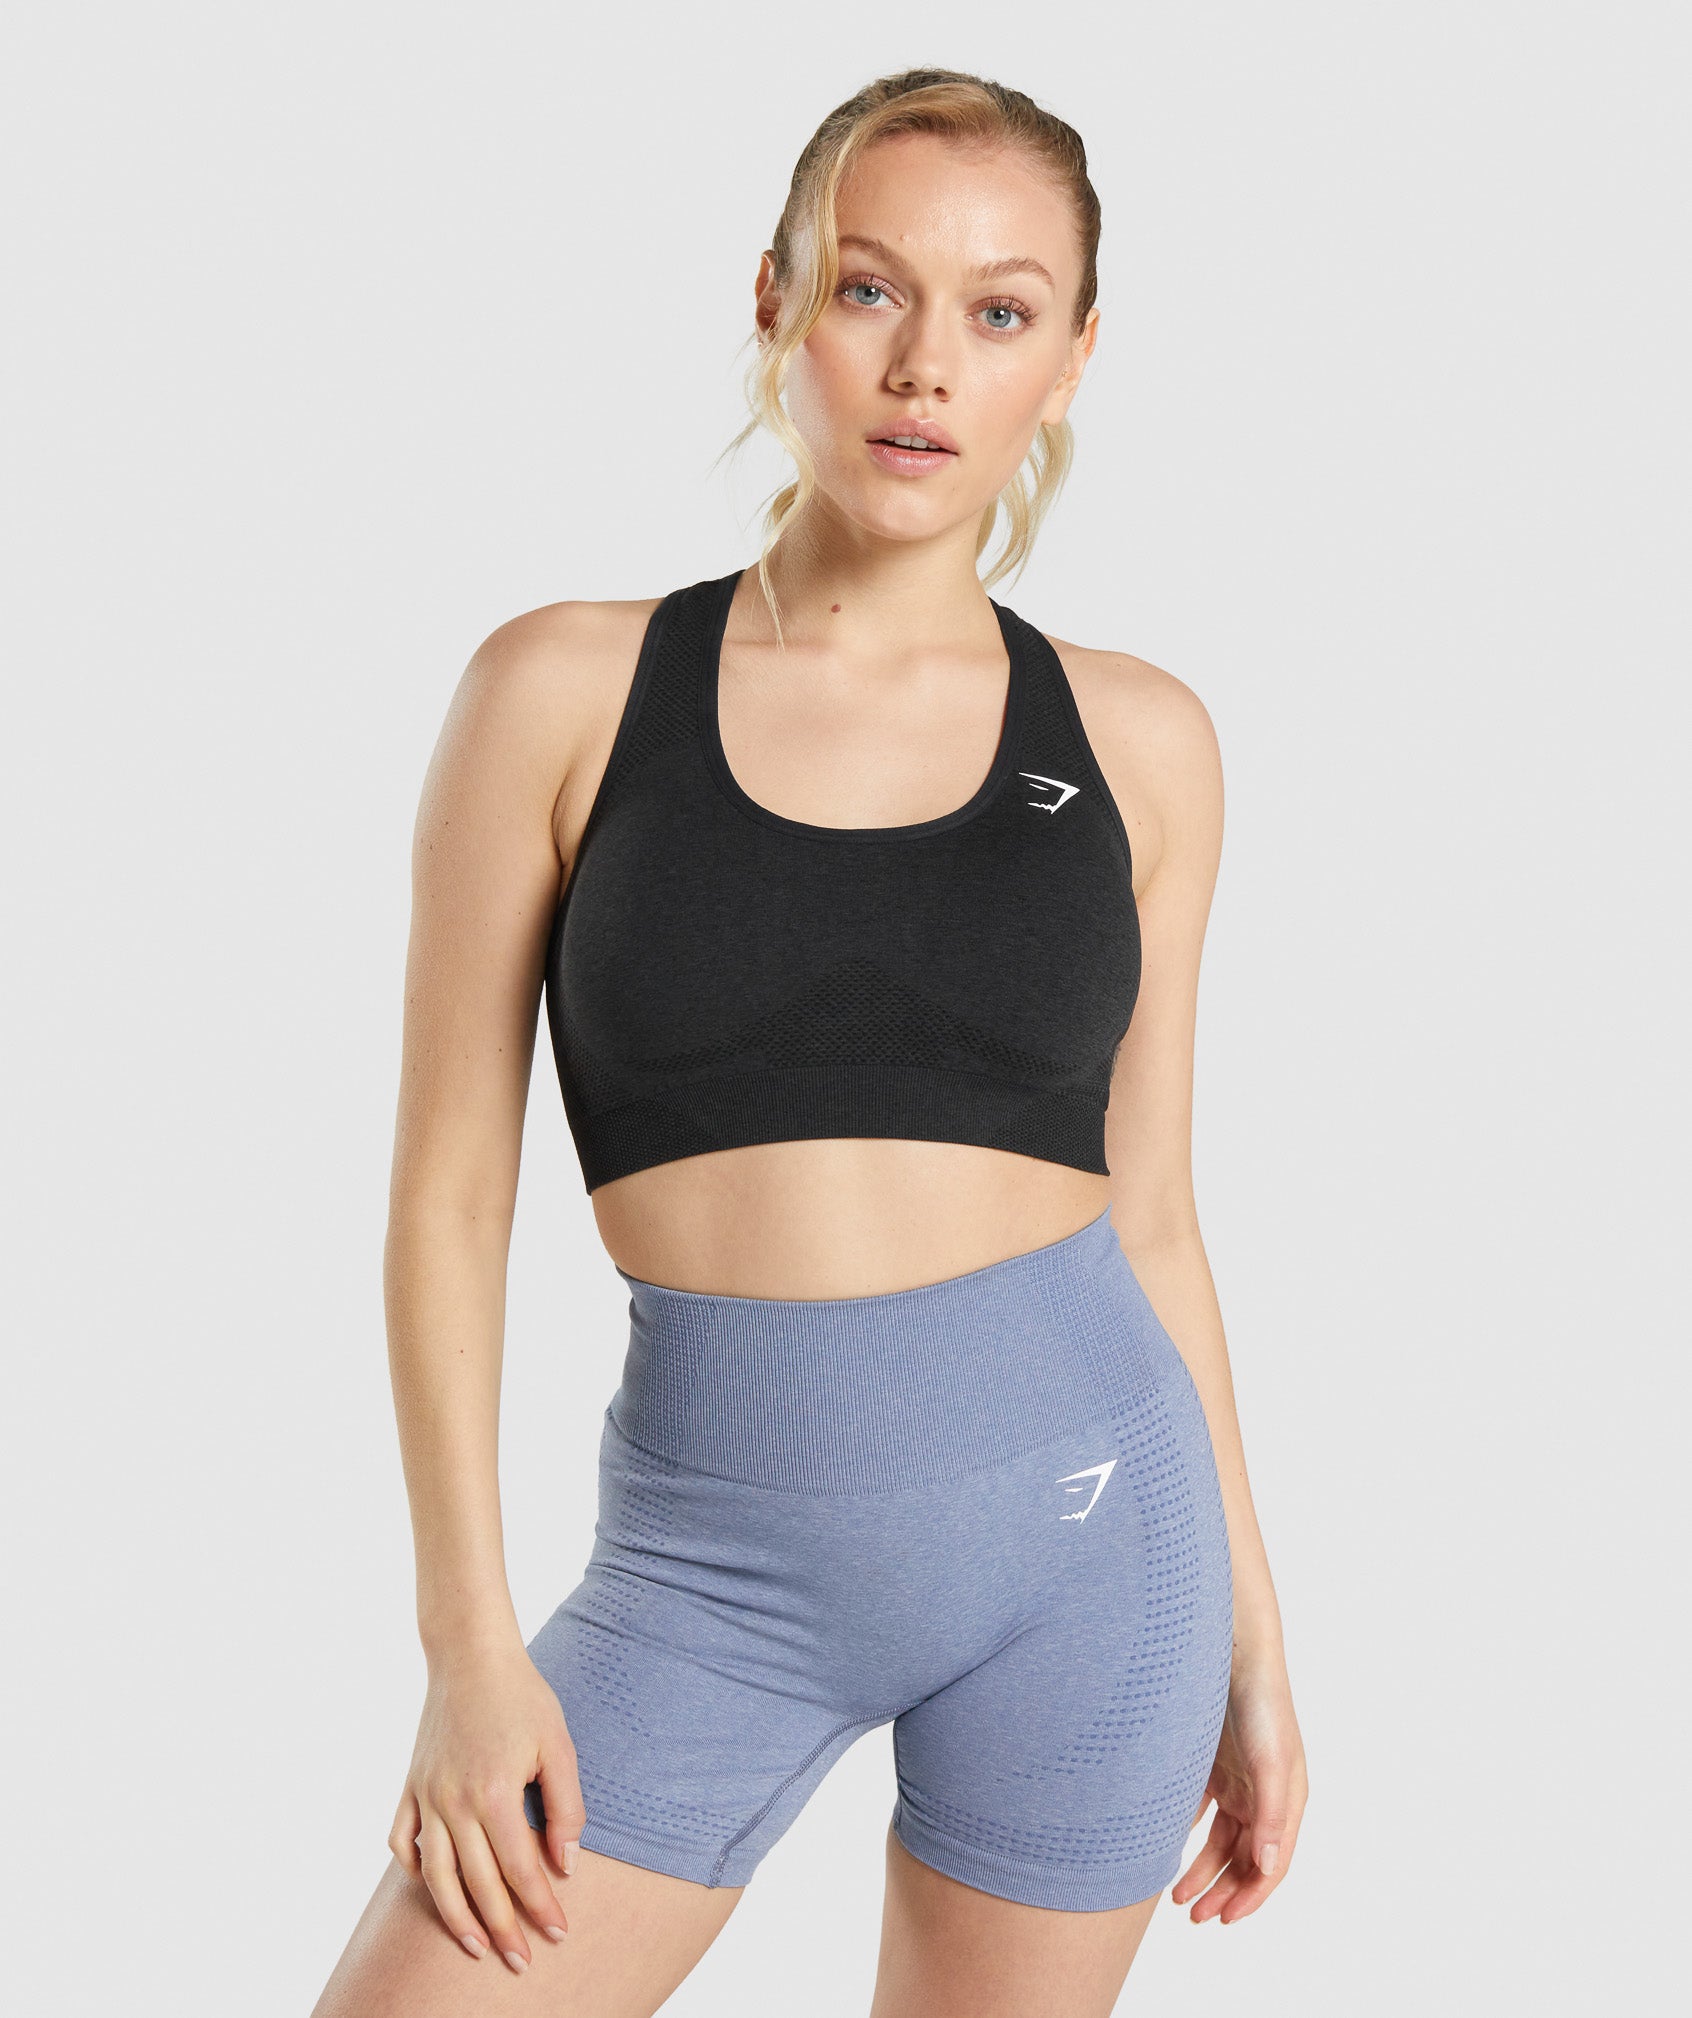 Vital Seamless Yoga Glamorise Sports Bra With Medium Support For Running  And Fitness Racerback Design, Brassiere Bra Top, Activewear X0822 From  Vip_official_001, $7.28